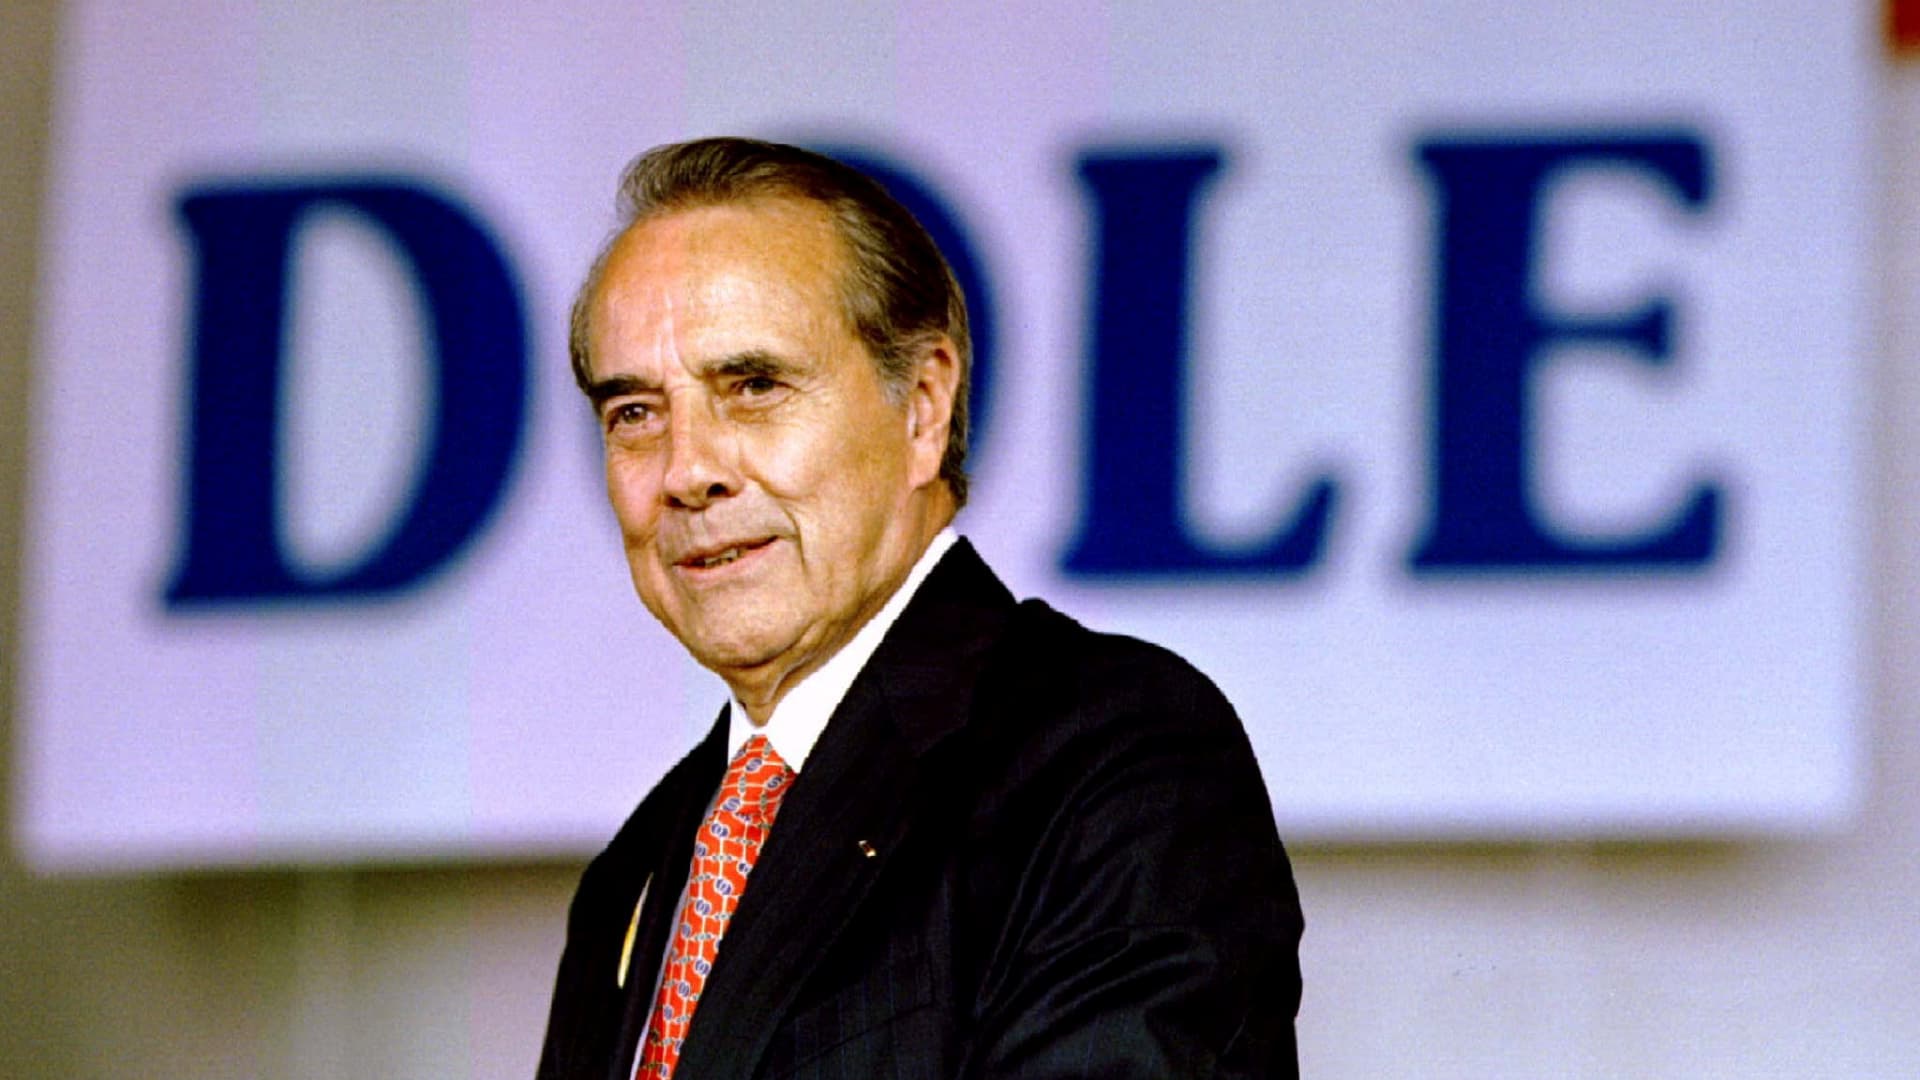 Republican presidential nominee Bob Dole addresses Republican faithful during a rally in a hanger of the MBS International Airport in Freeland, Michigan, U.S. September 13, 1996.